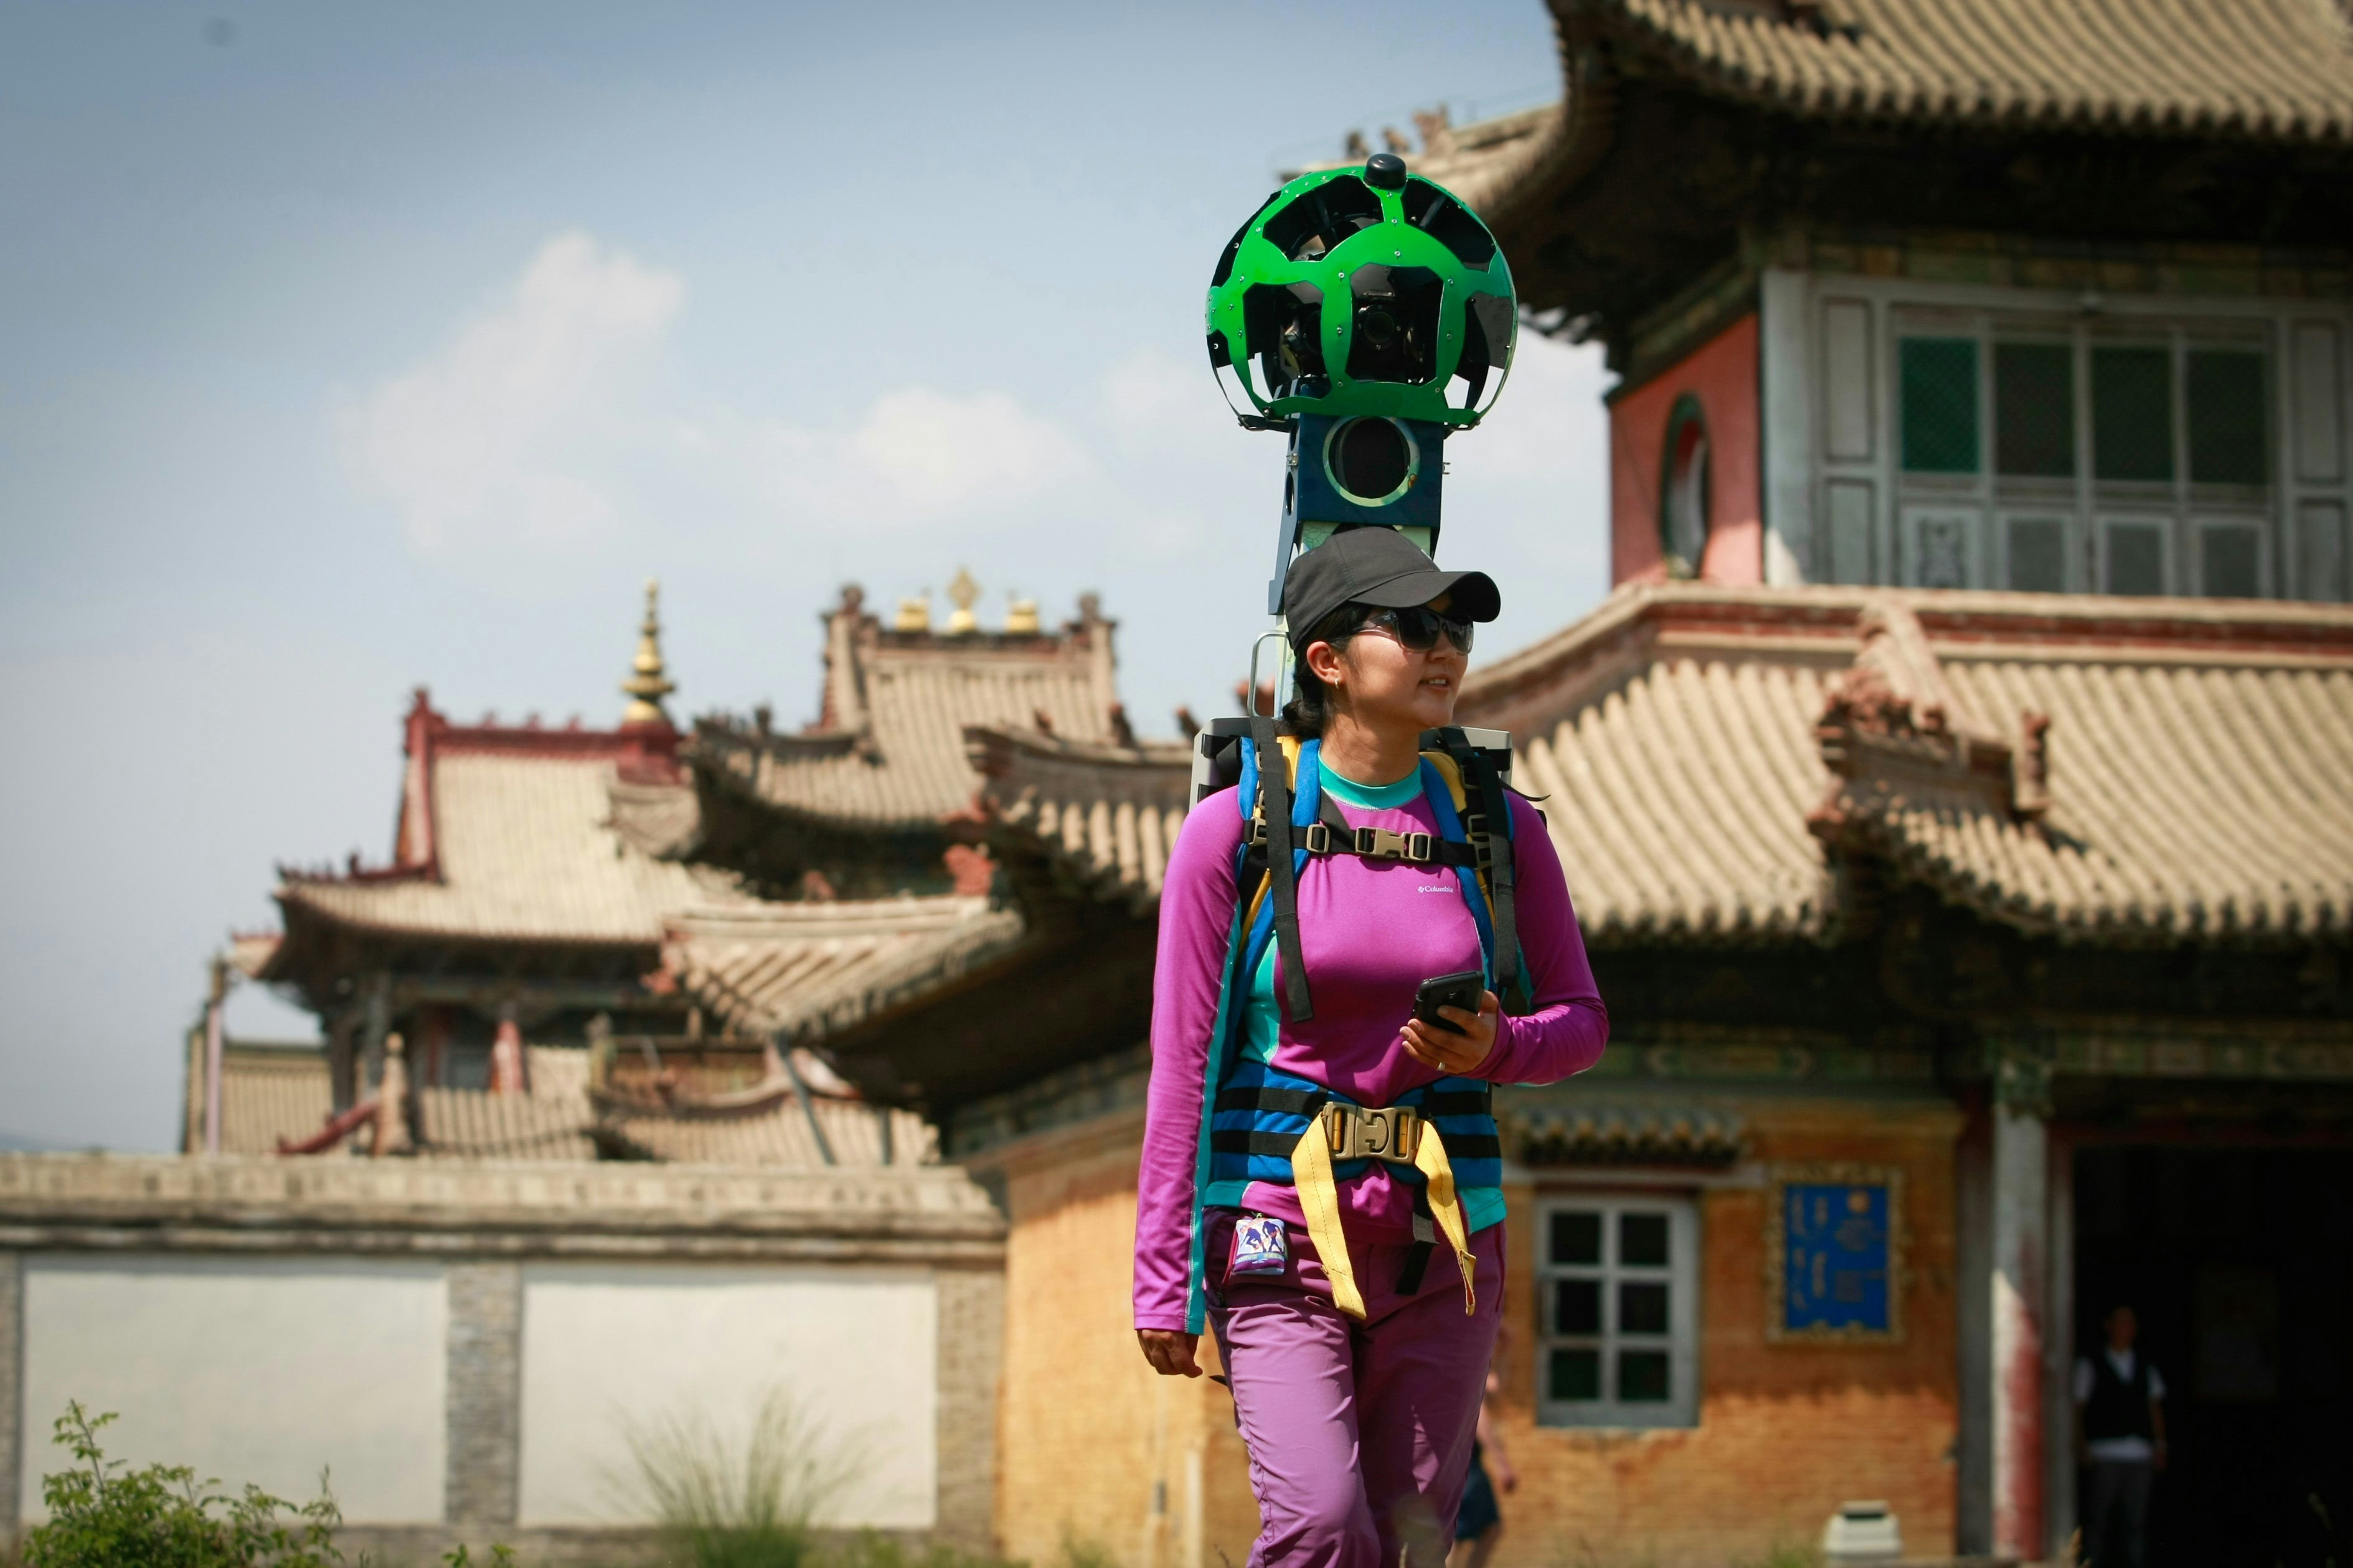 A woma nin a pink technical fabric top and matching pants and a black cap with a brim walks past the orange buildings and clay roofs of the Choijin Lama Museum in Ulan Bator with a green camera sphere from Google Street View strapped to her back